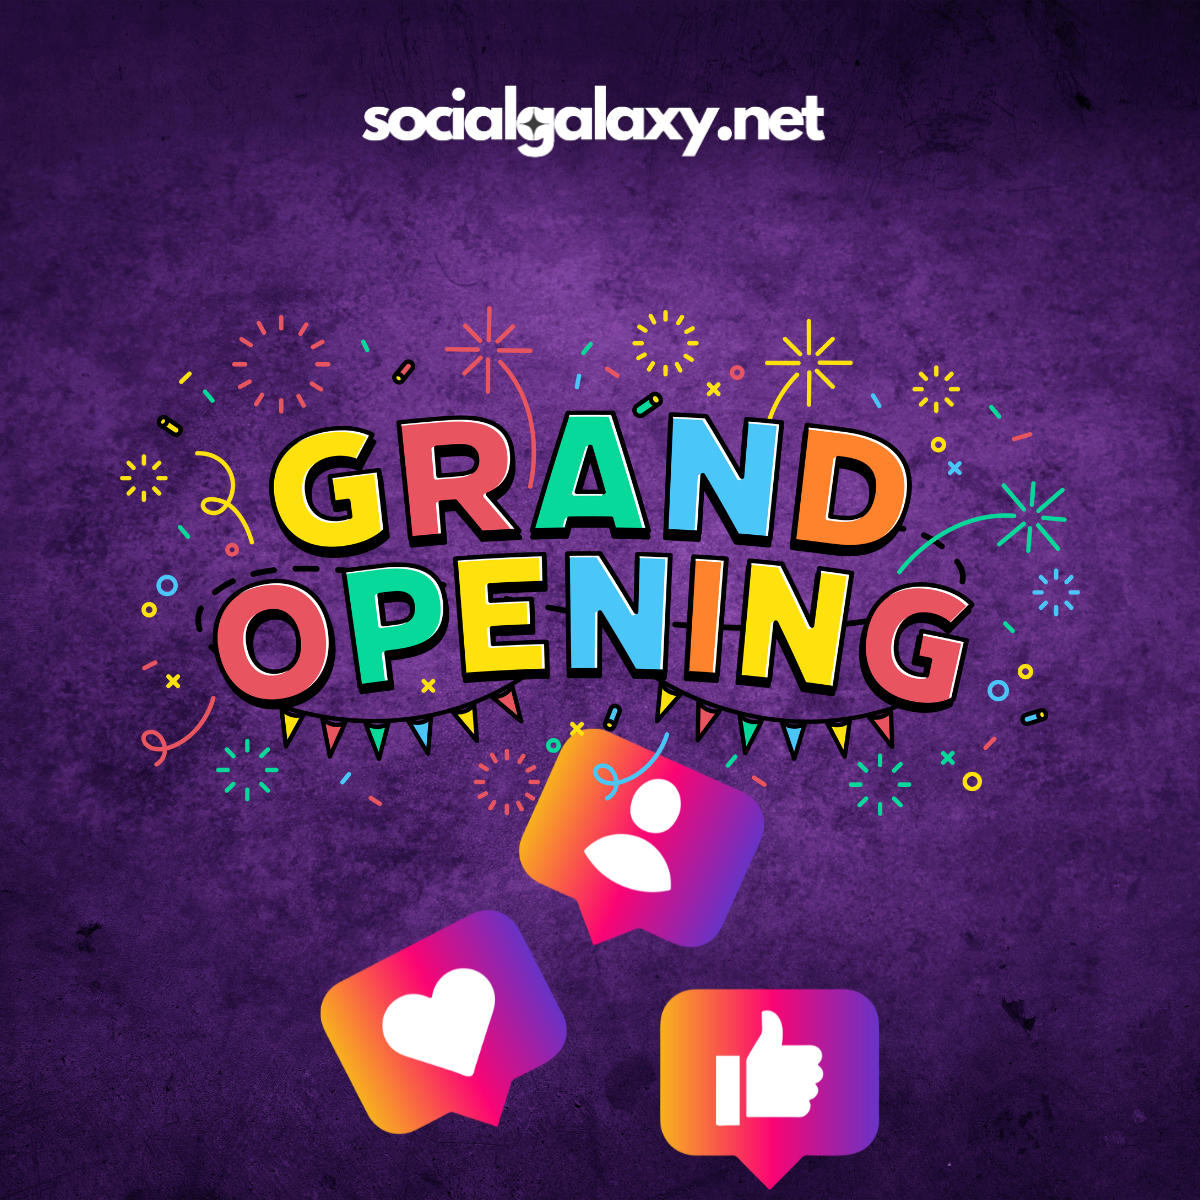 A Grand Opening: Get Free Instagram Followers